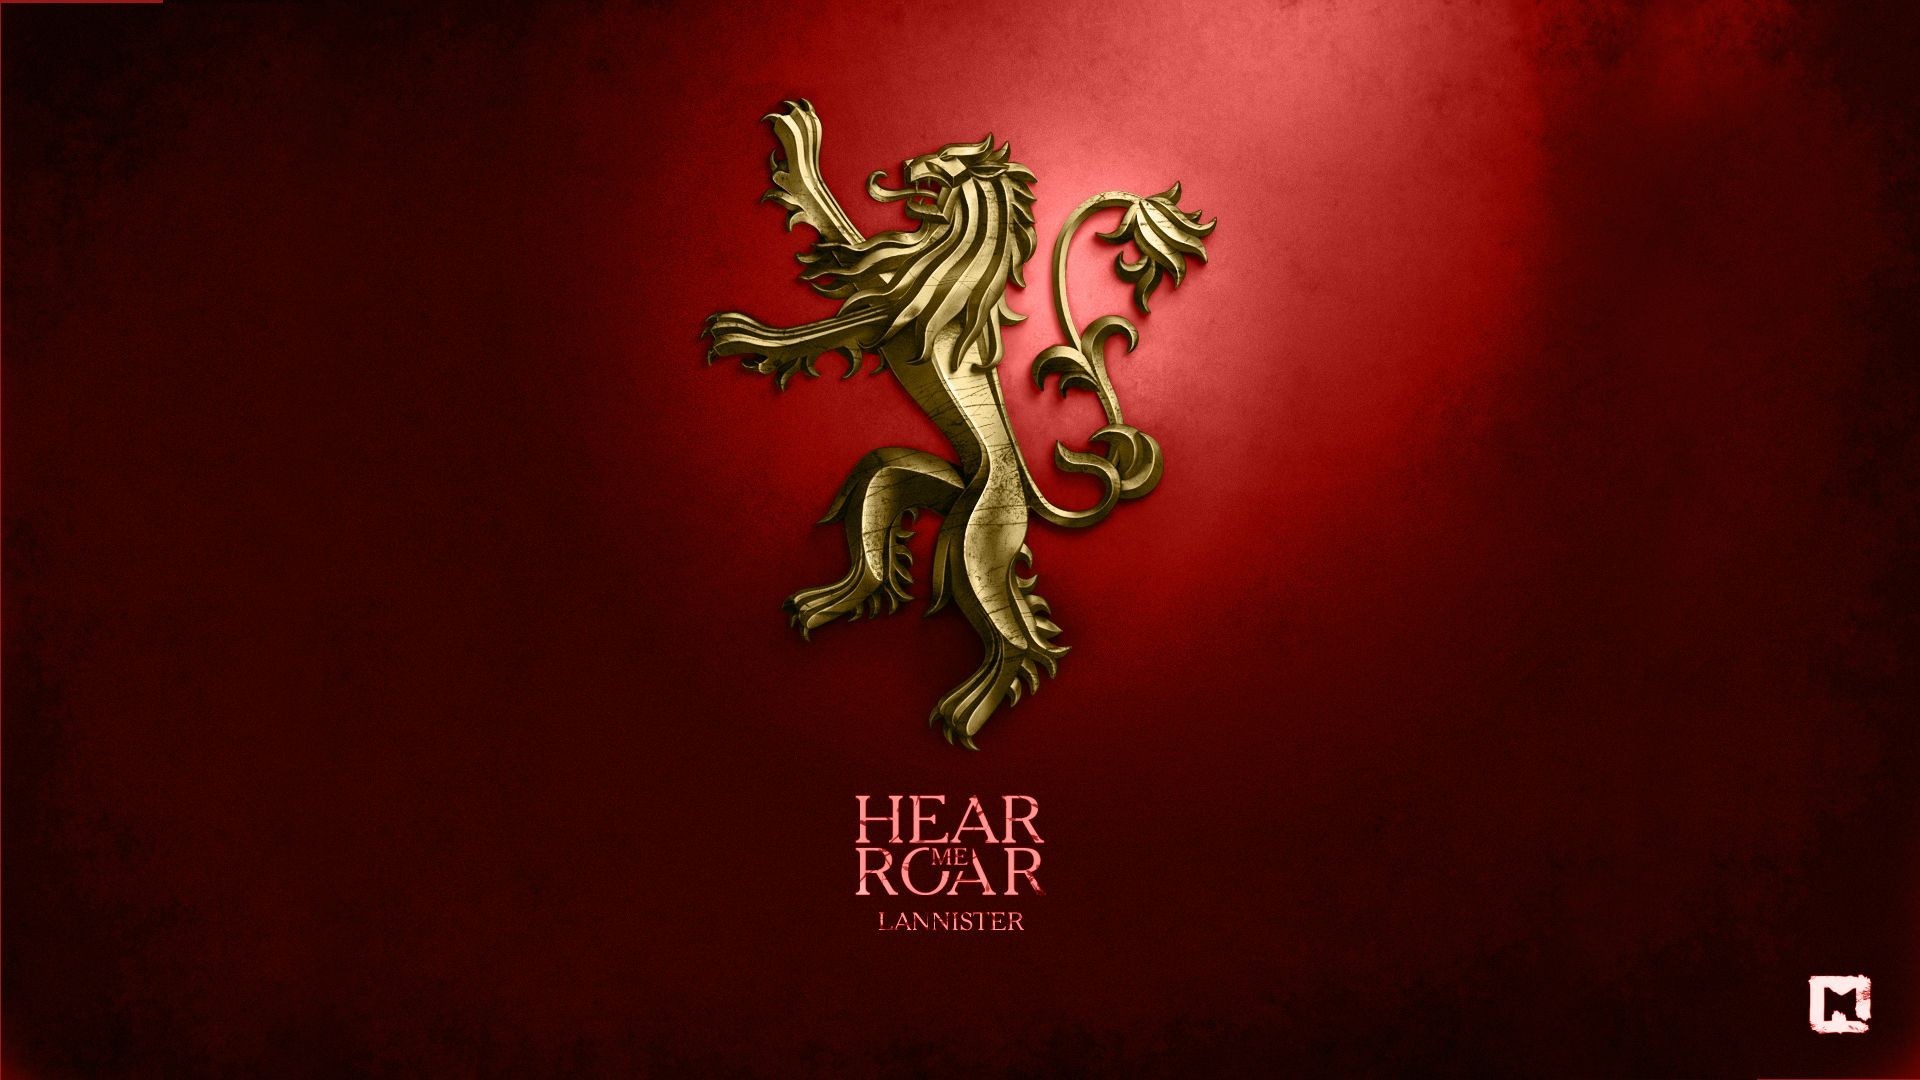 Game Of Thrones, A Song Of Ice And Fire, Digital Art, House Lannister, Sigils Wallpaper